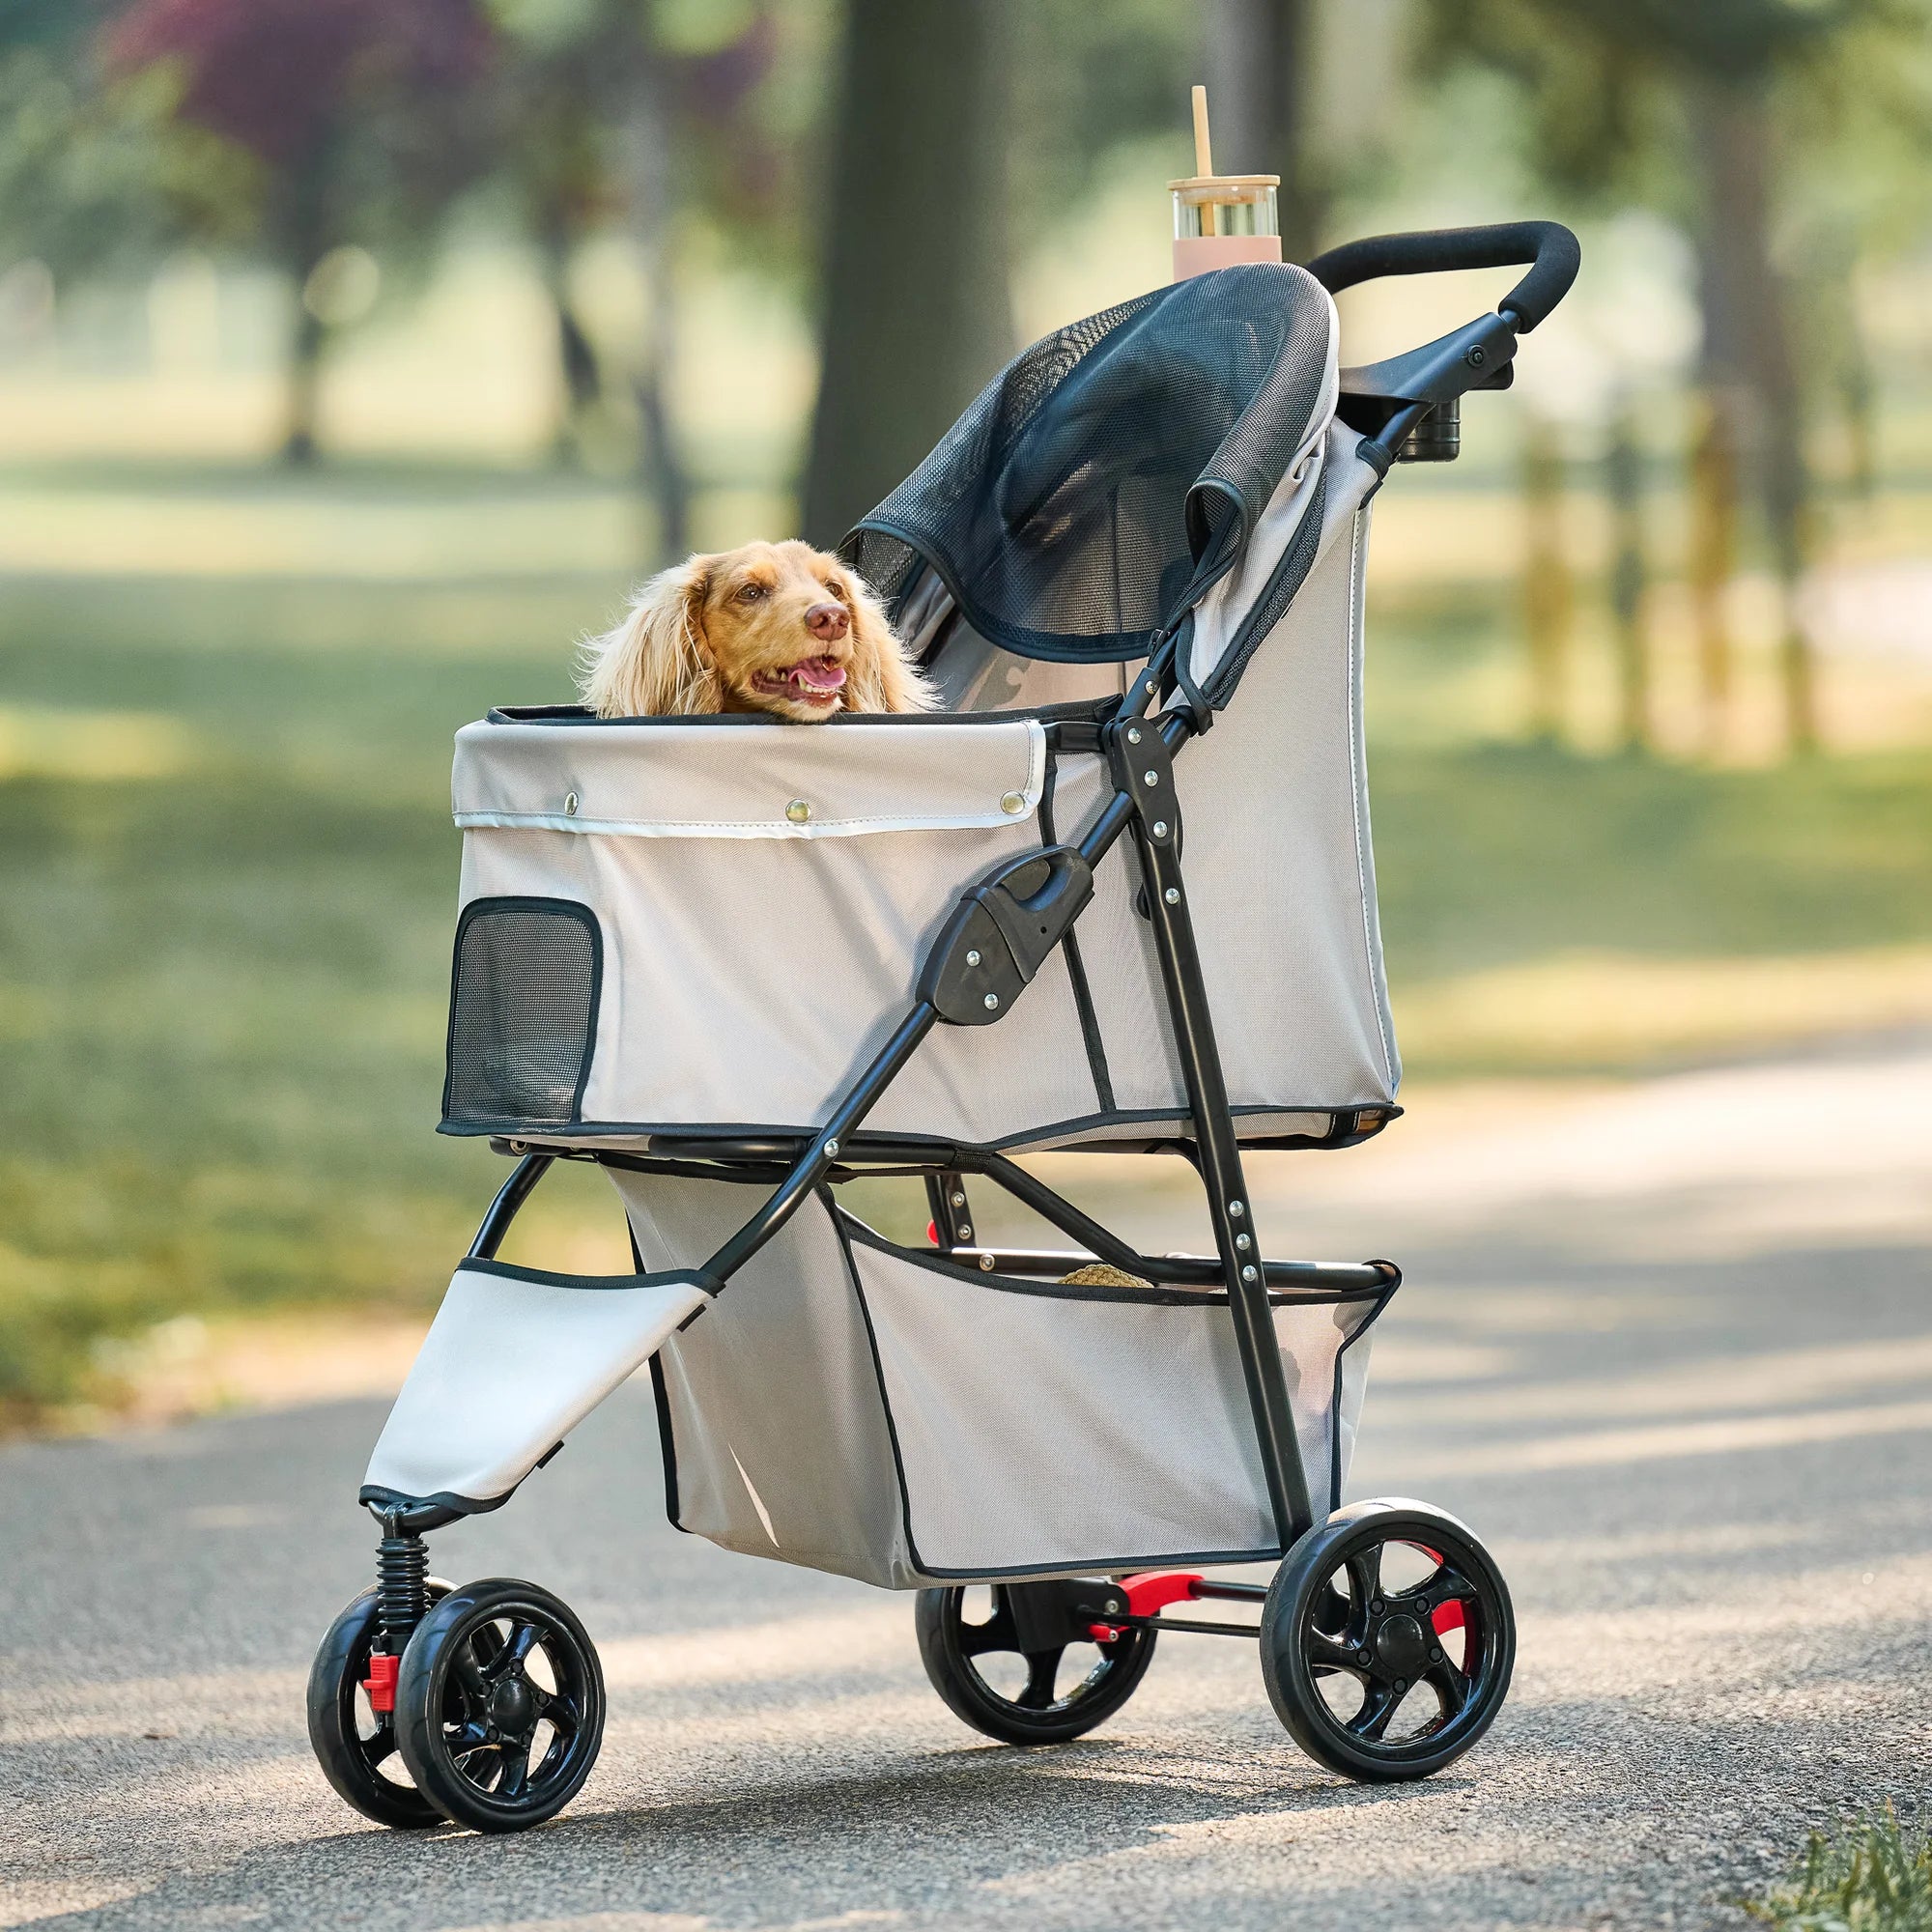 Brown dog sitting in Carlson Portable Pup Pet Stroller in Park.